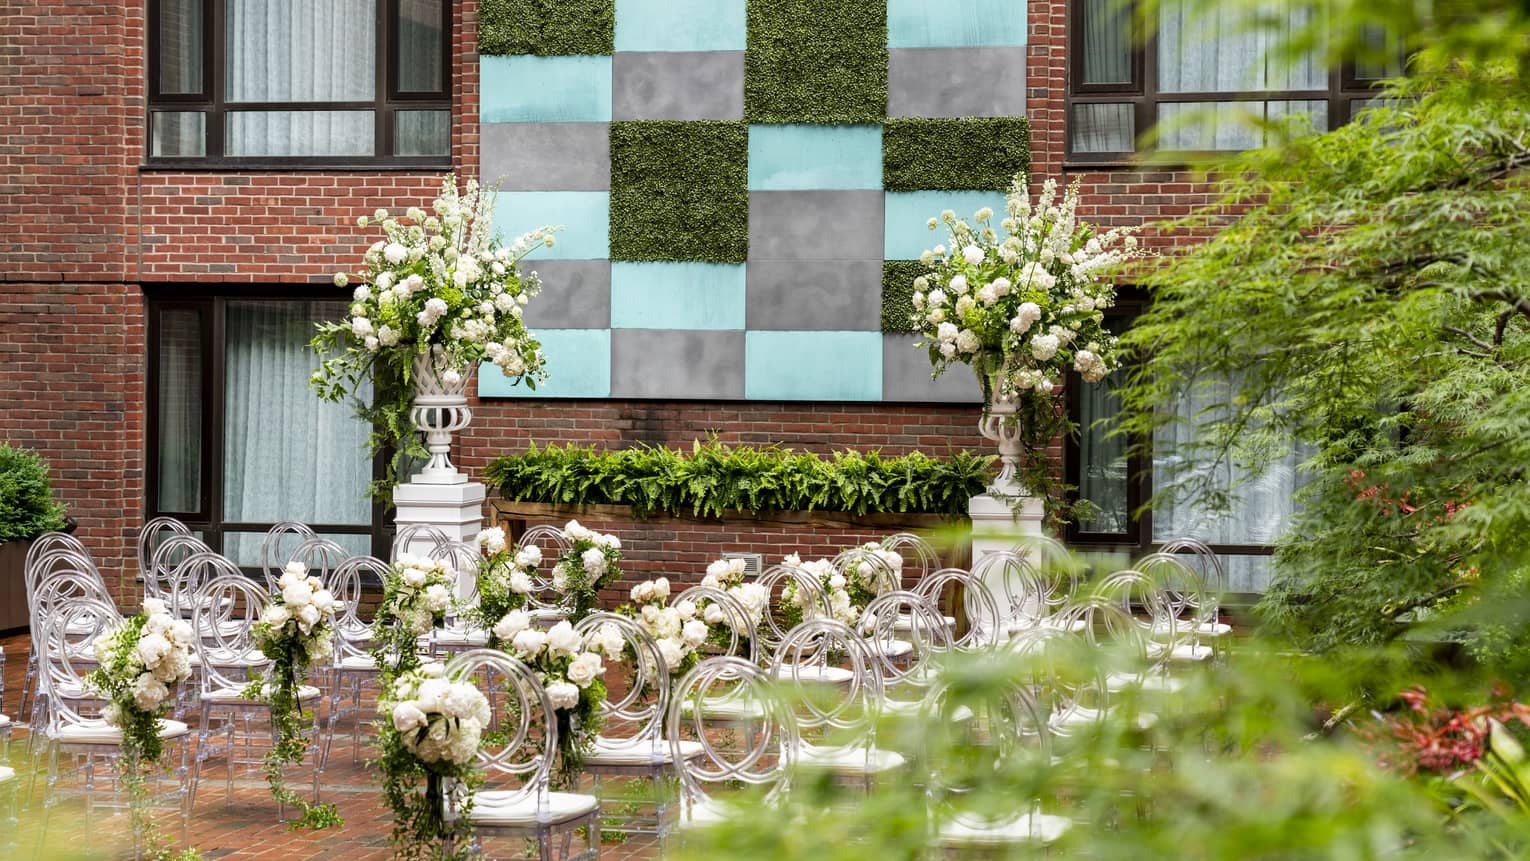 An outdoor area with rows of white seats and flowers arranged around them, a brick walled building can be seen in front of the chairs.